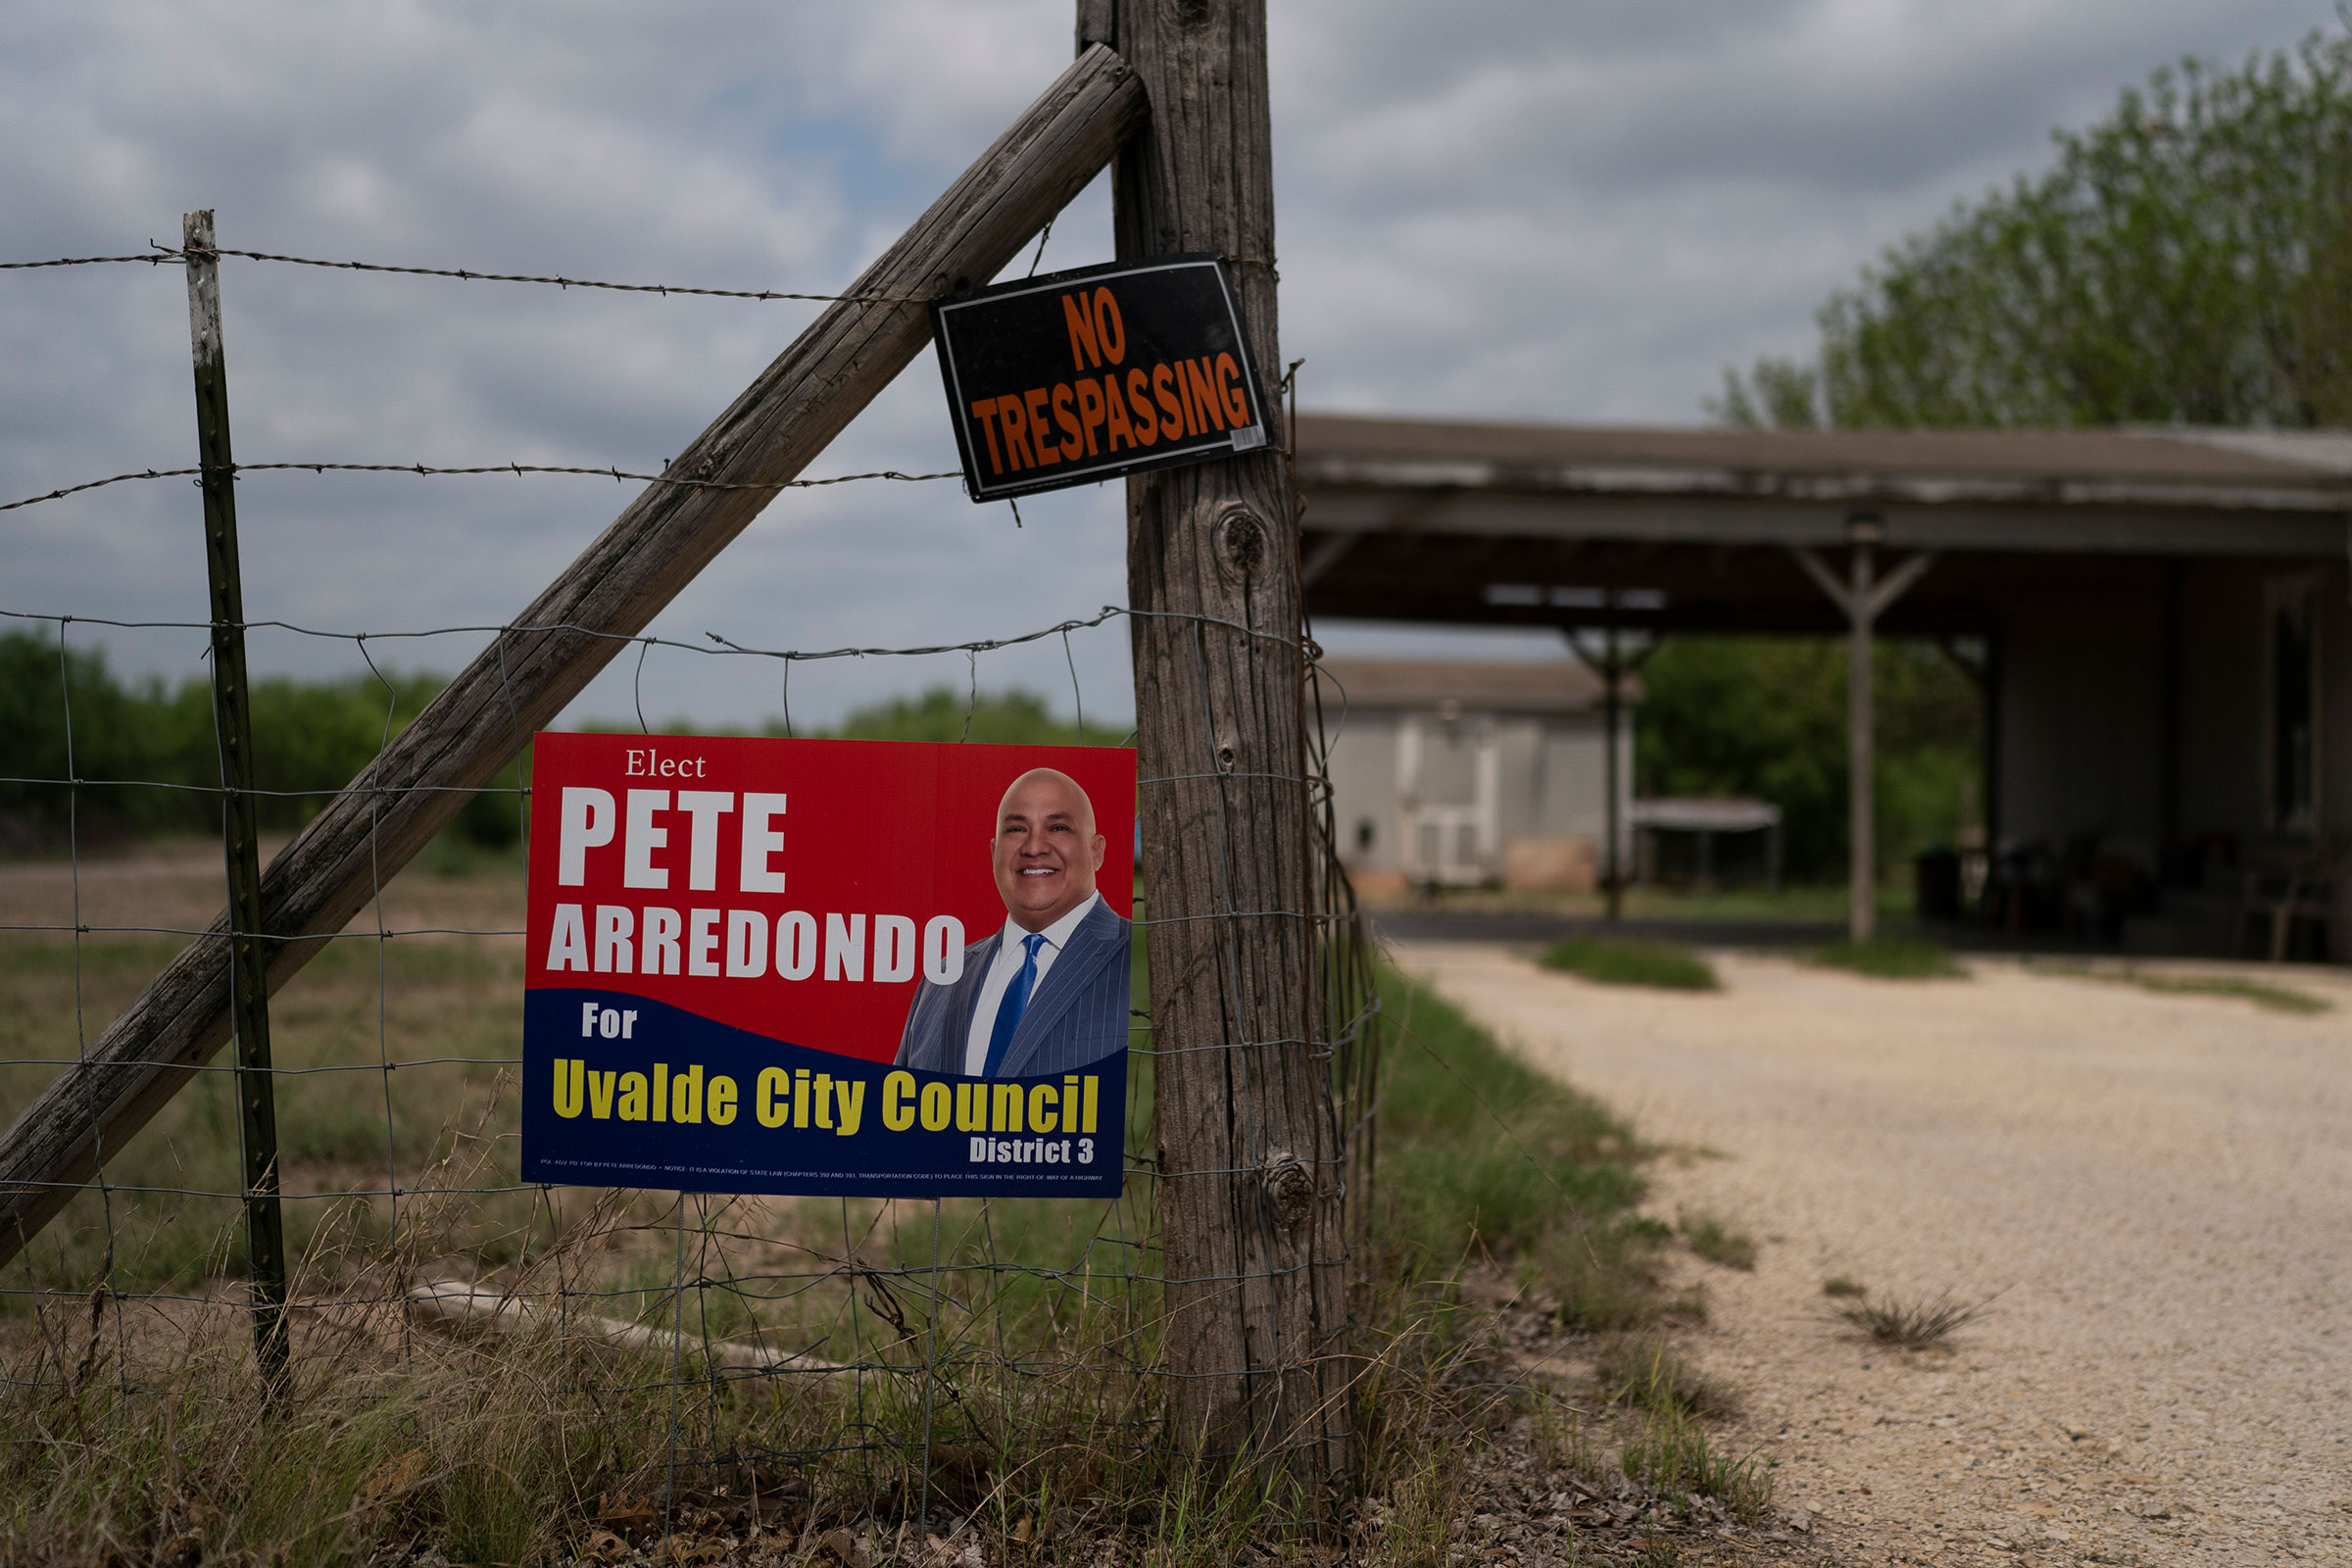 A campaign sign for Pete Arredondo hangs on a fence in Uvalde on May 30. (Jae C. Hong—AP)